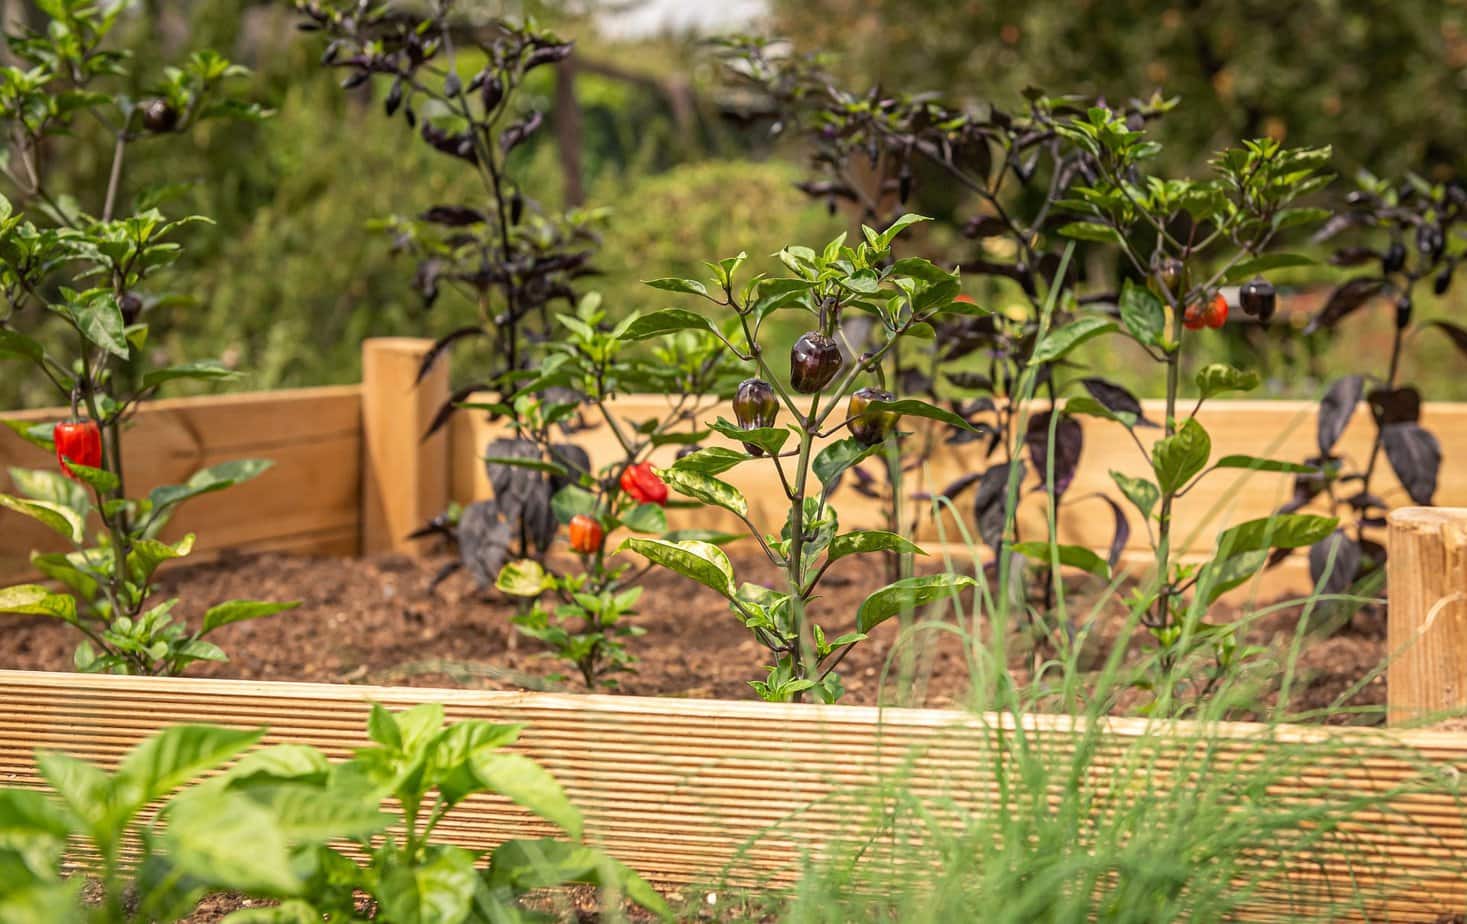 Cultivation in Beautiful Raised Bed Garden